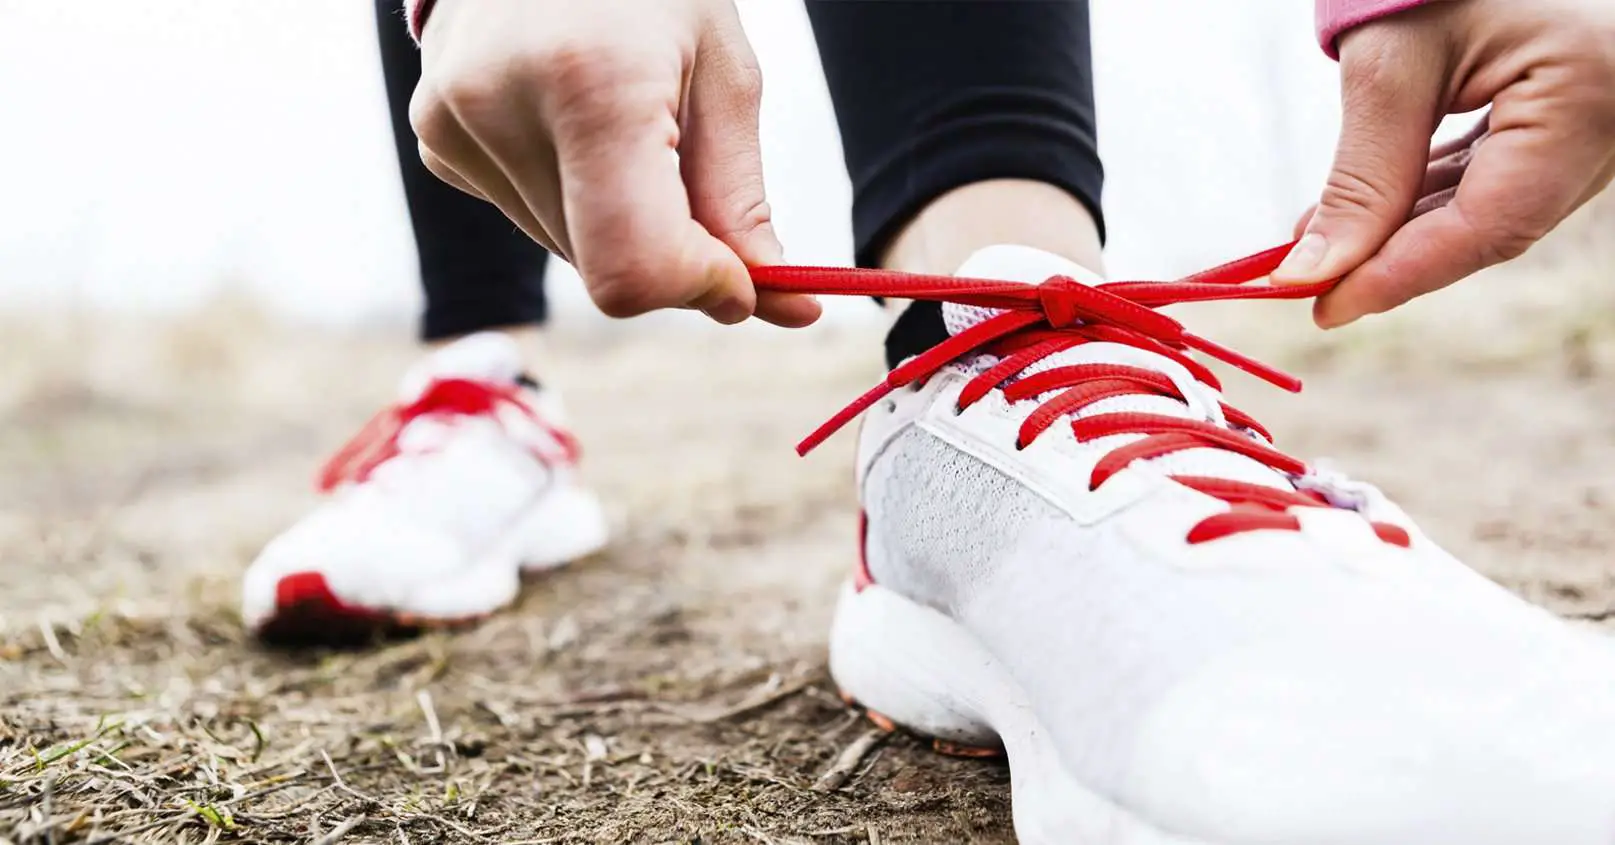 The simplest way to find your perfect running shoes (and ...